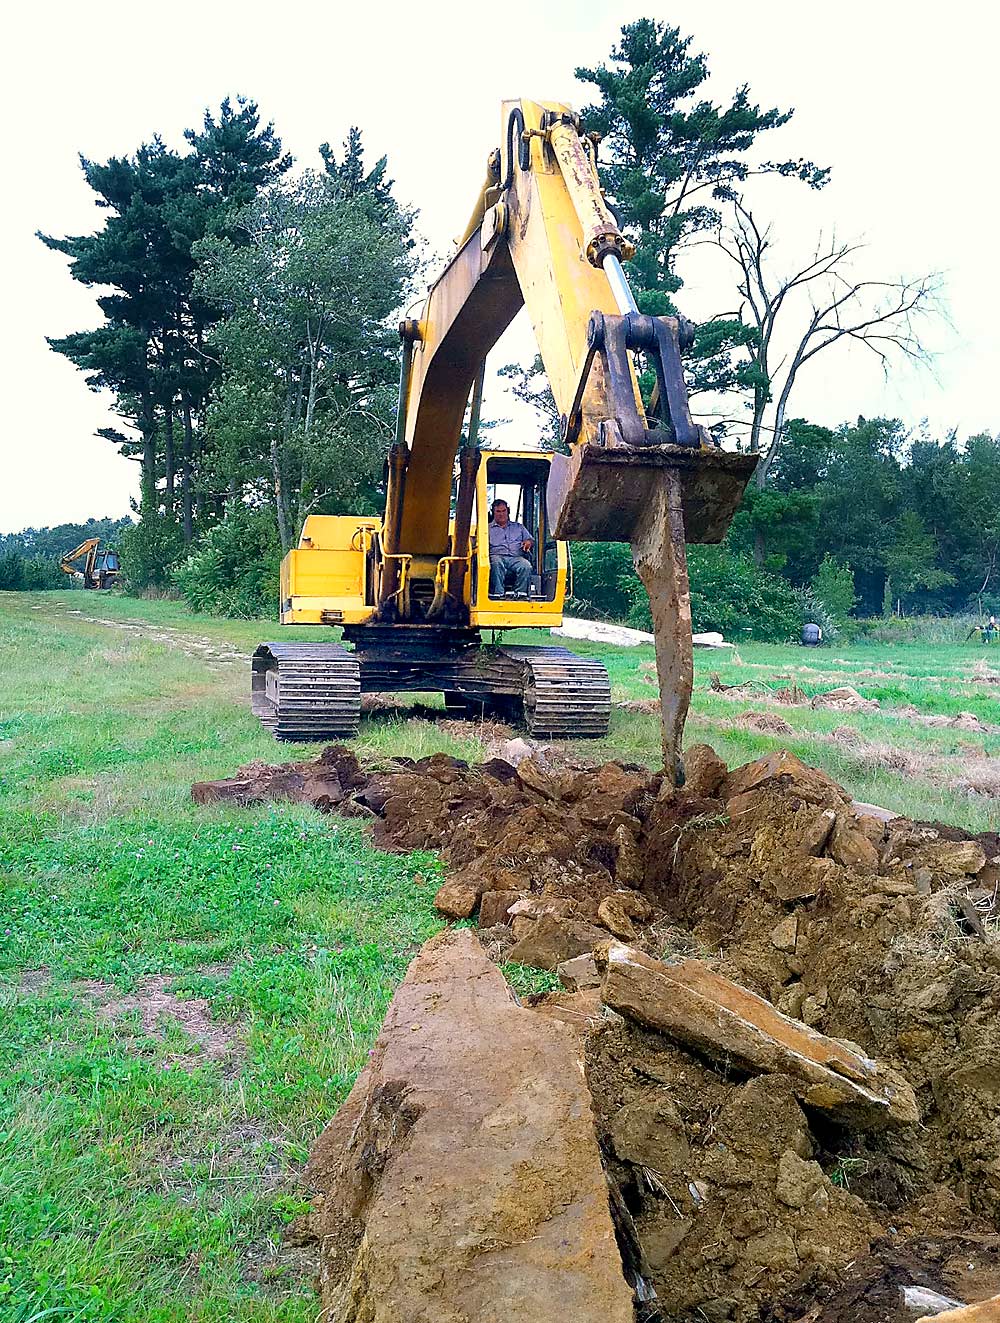 Grower Mo Tougas rips a planting trench for apples at Tougas Family Farm in Northborough, Massachusetts. Note the large rocks. New England growers spend a lot of time and money removing boulders from their soil. (Courtesy Andre Tougas)